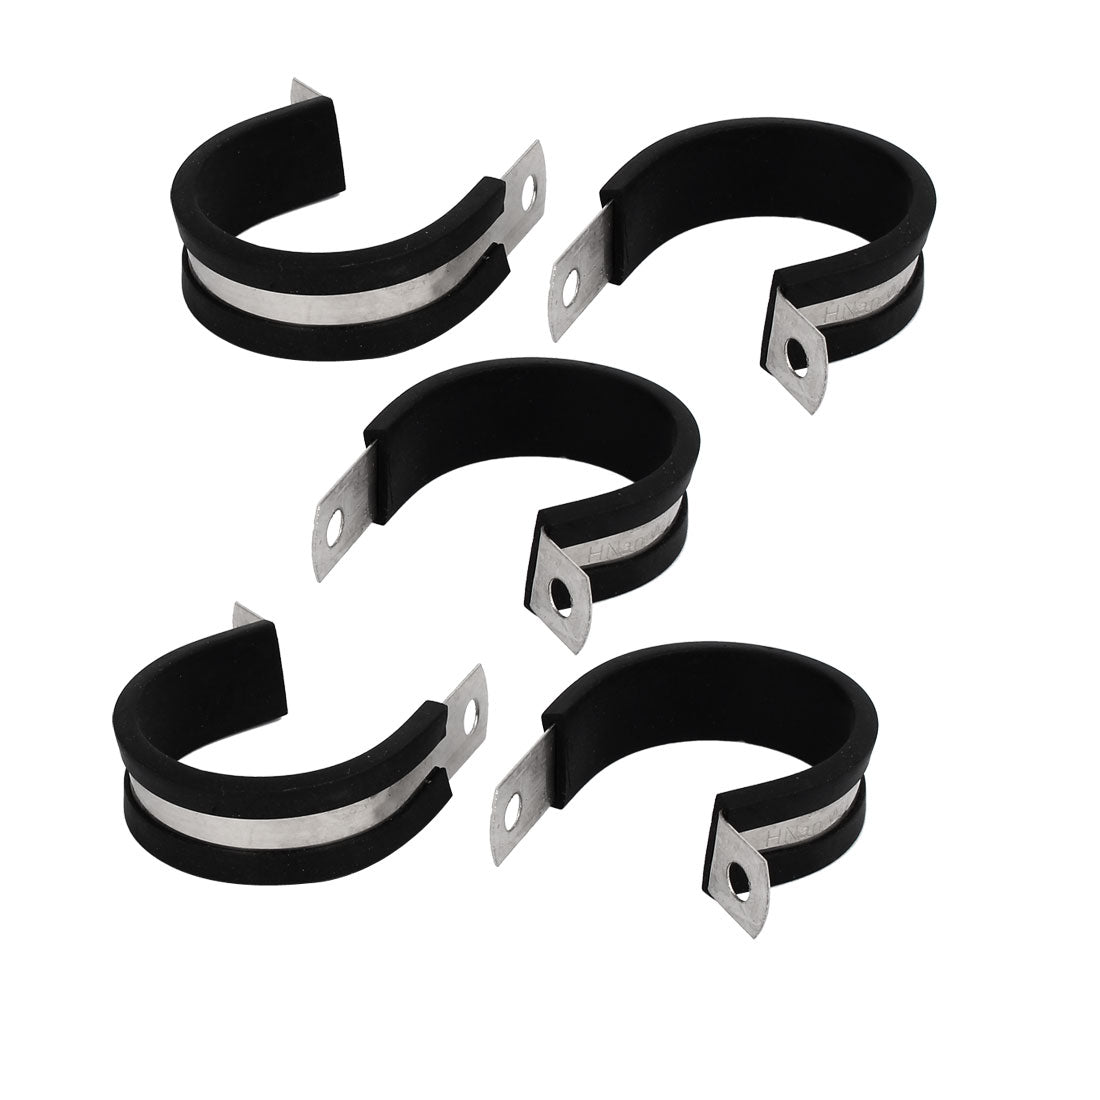 uxcell Uxcell 34mm Dia EPDM Rubber Lined P Clips Cable Hose Pipe Clamps Holder 5pcs